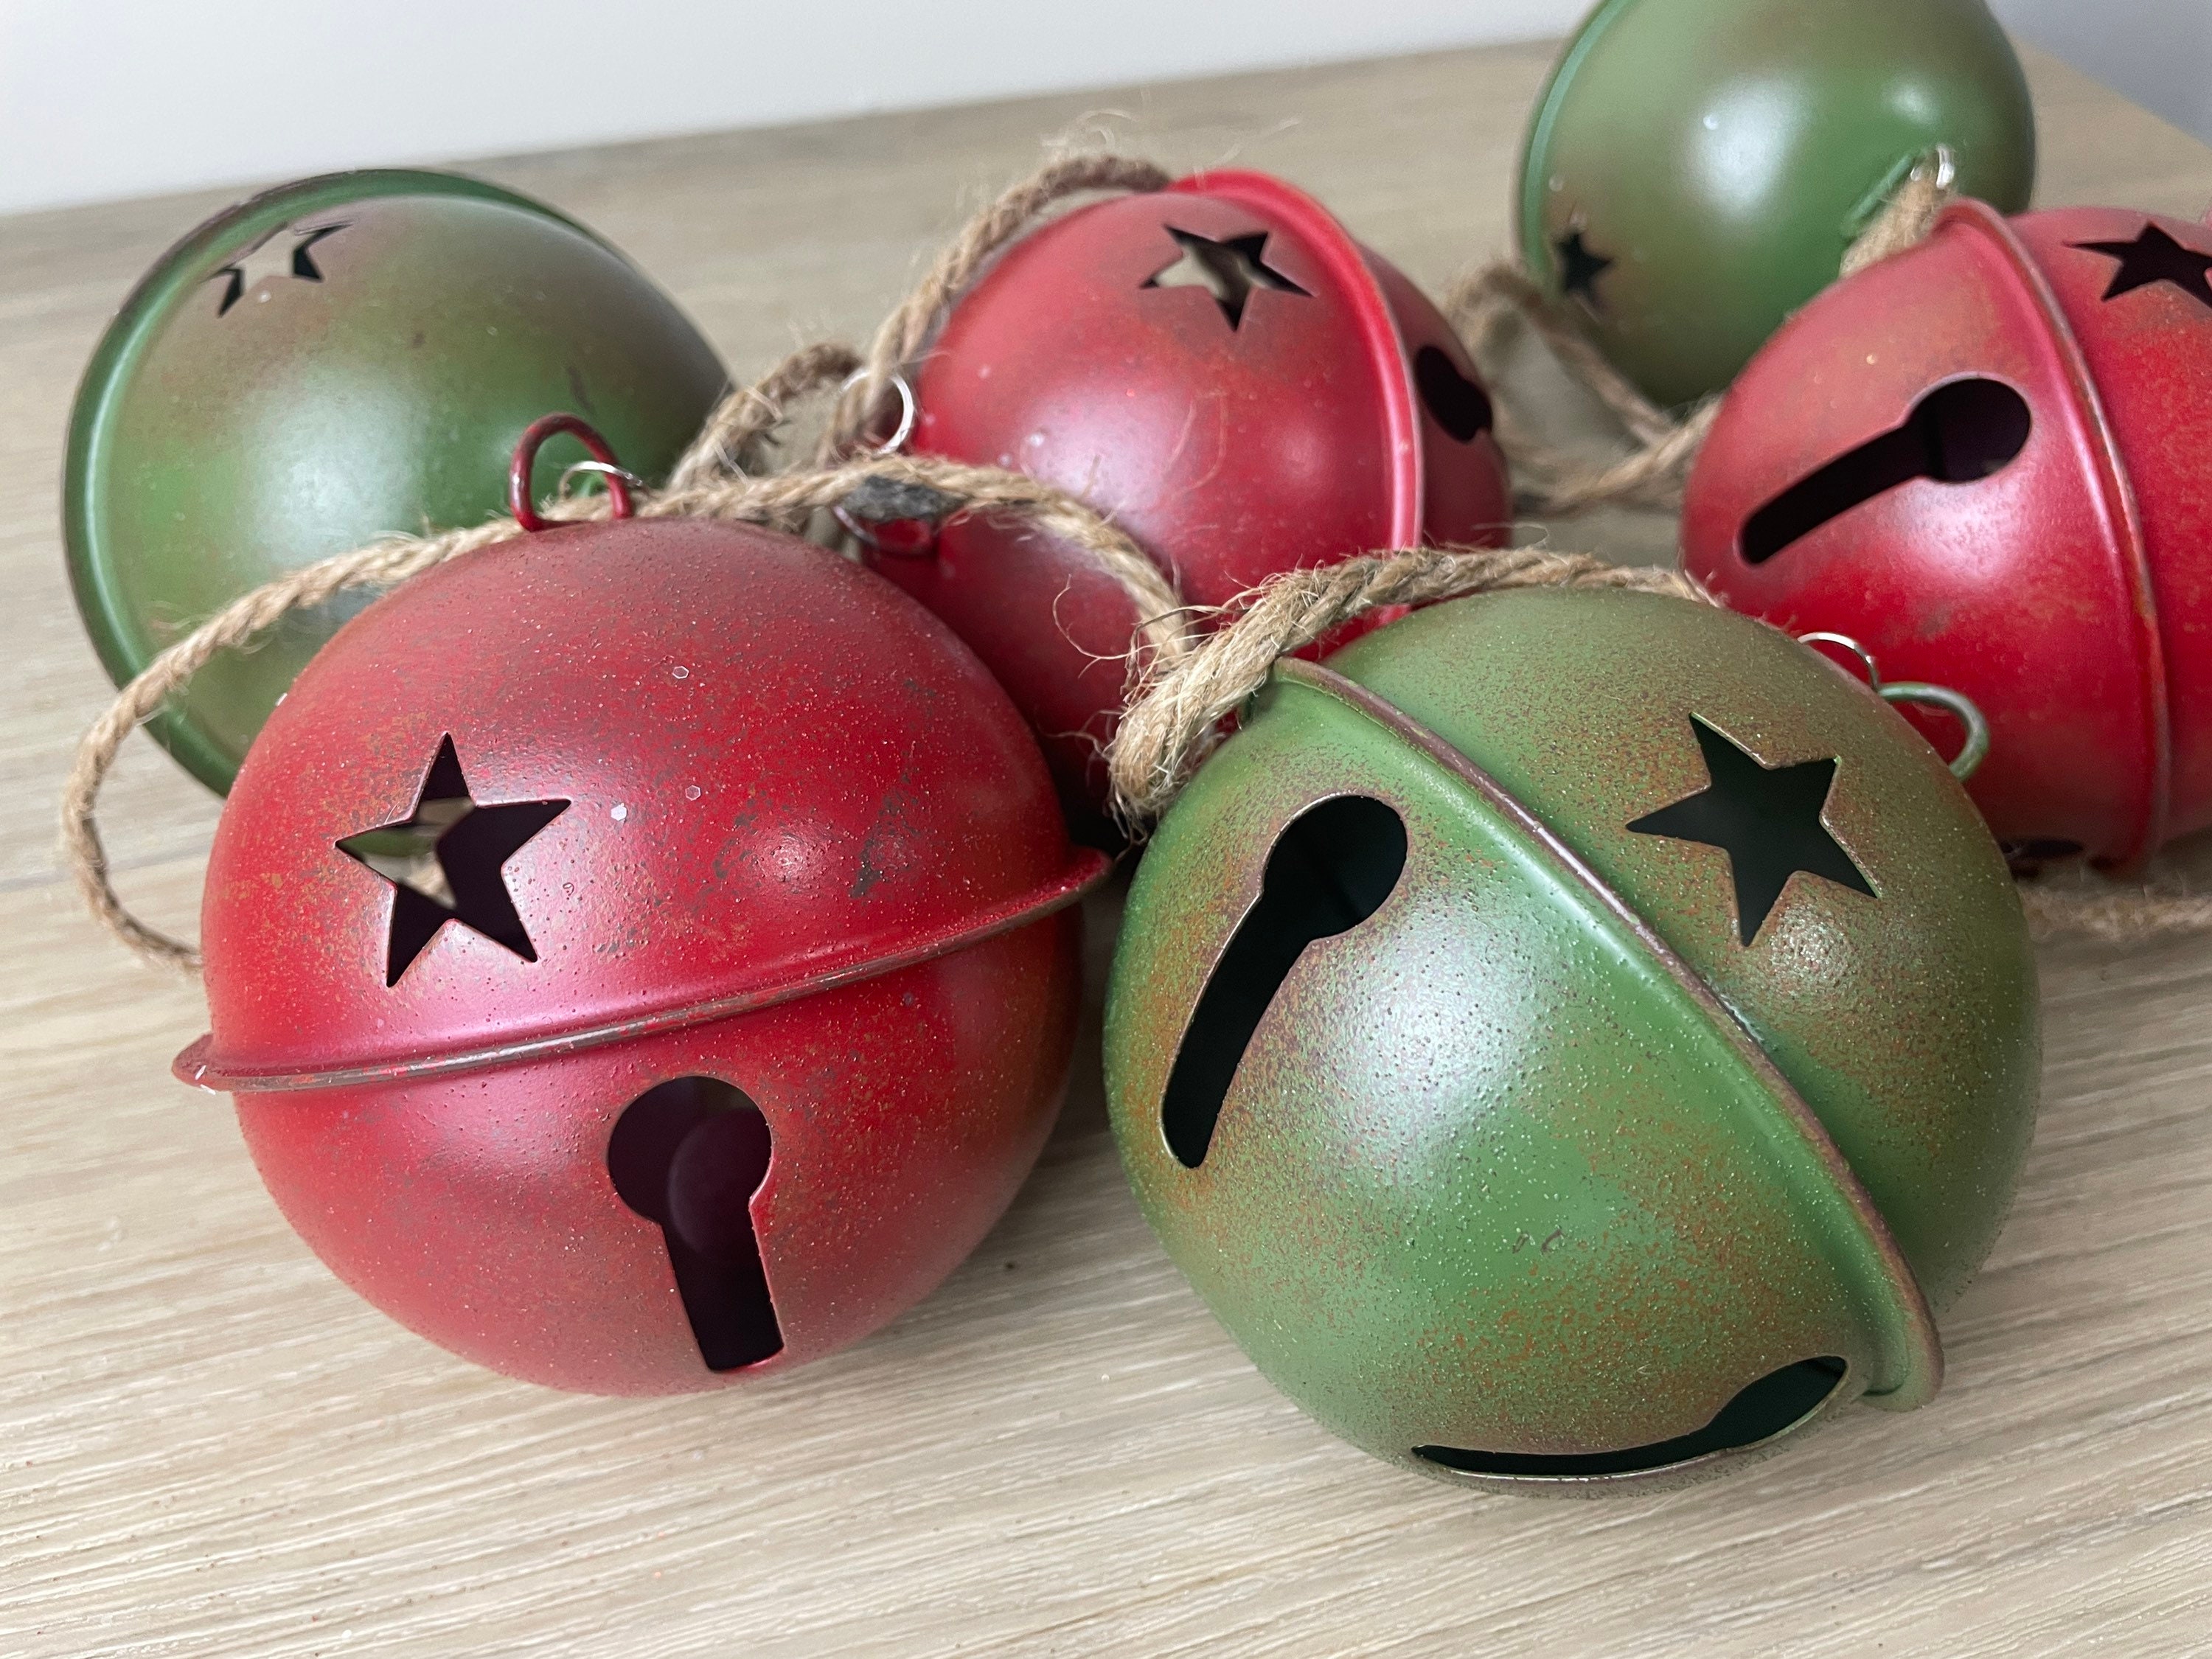 Stunning Large Metal Jingle Bells for Decor and Souvenirs